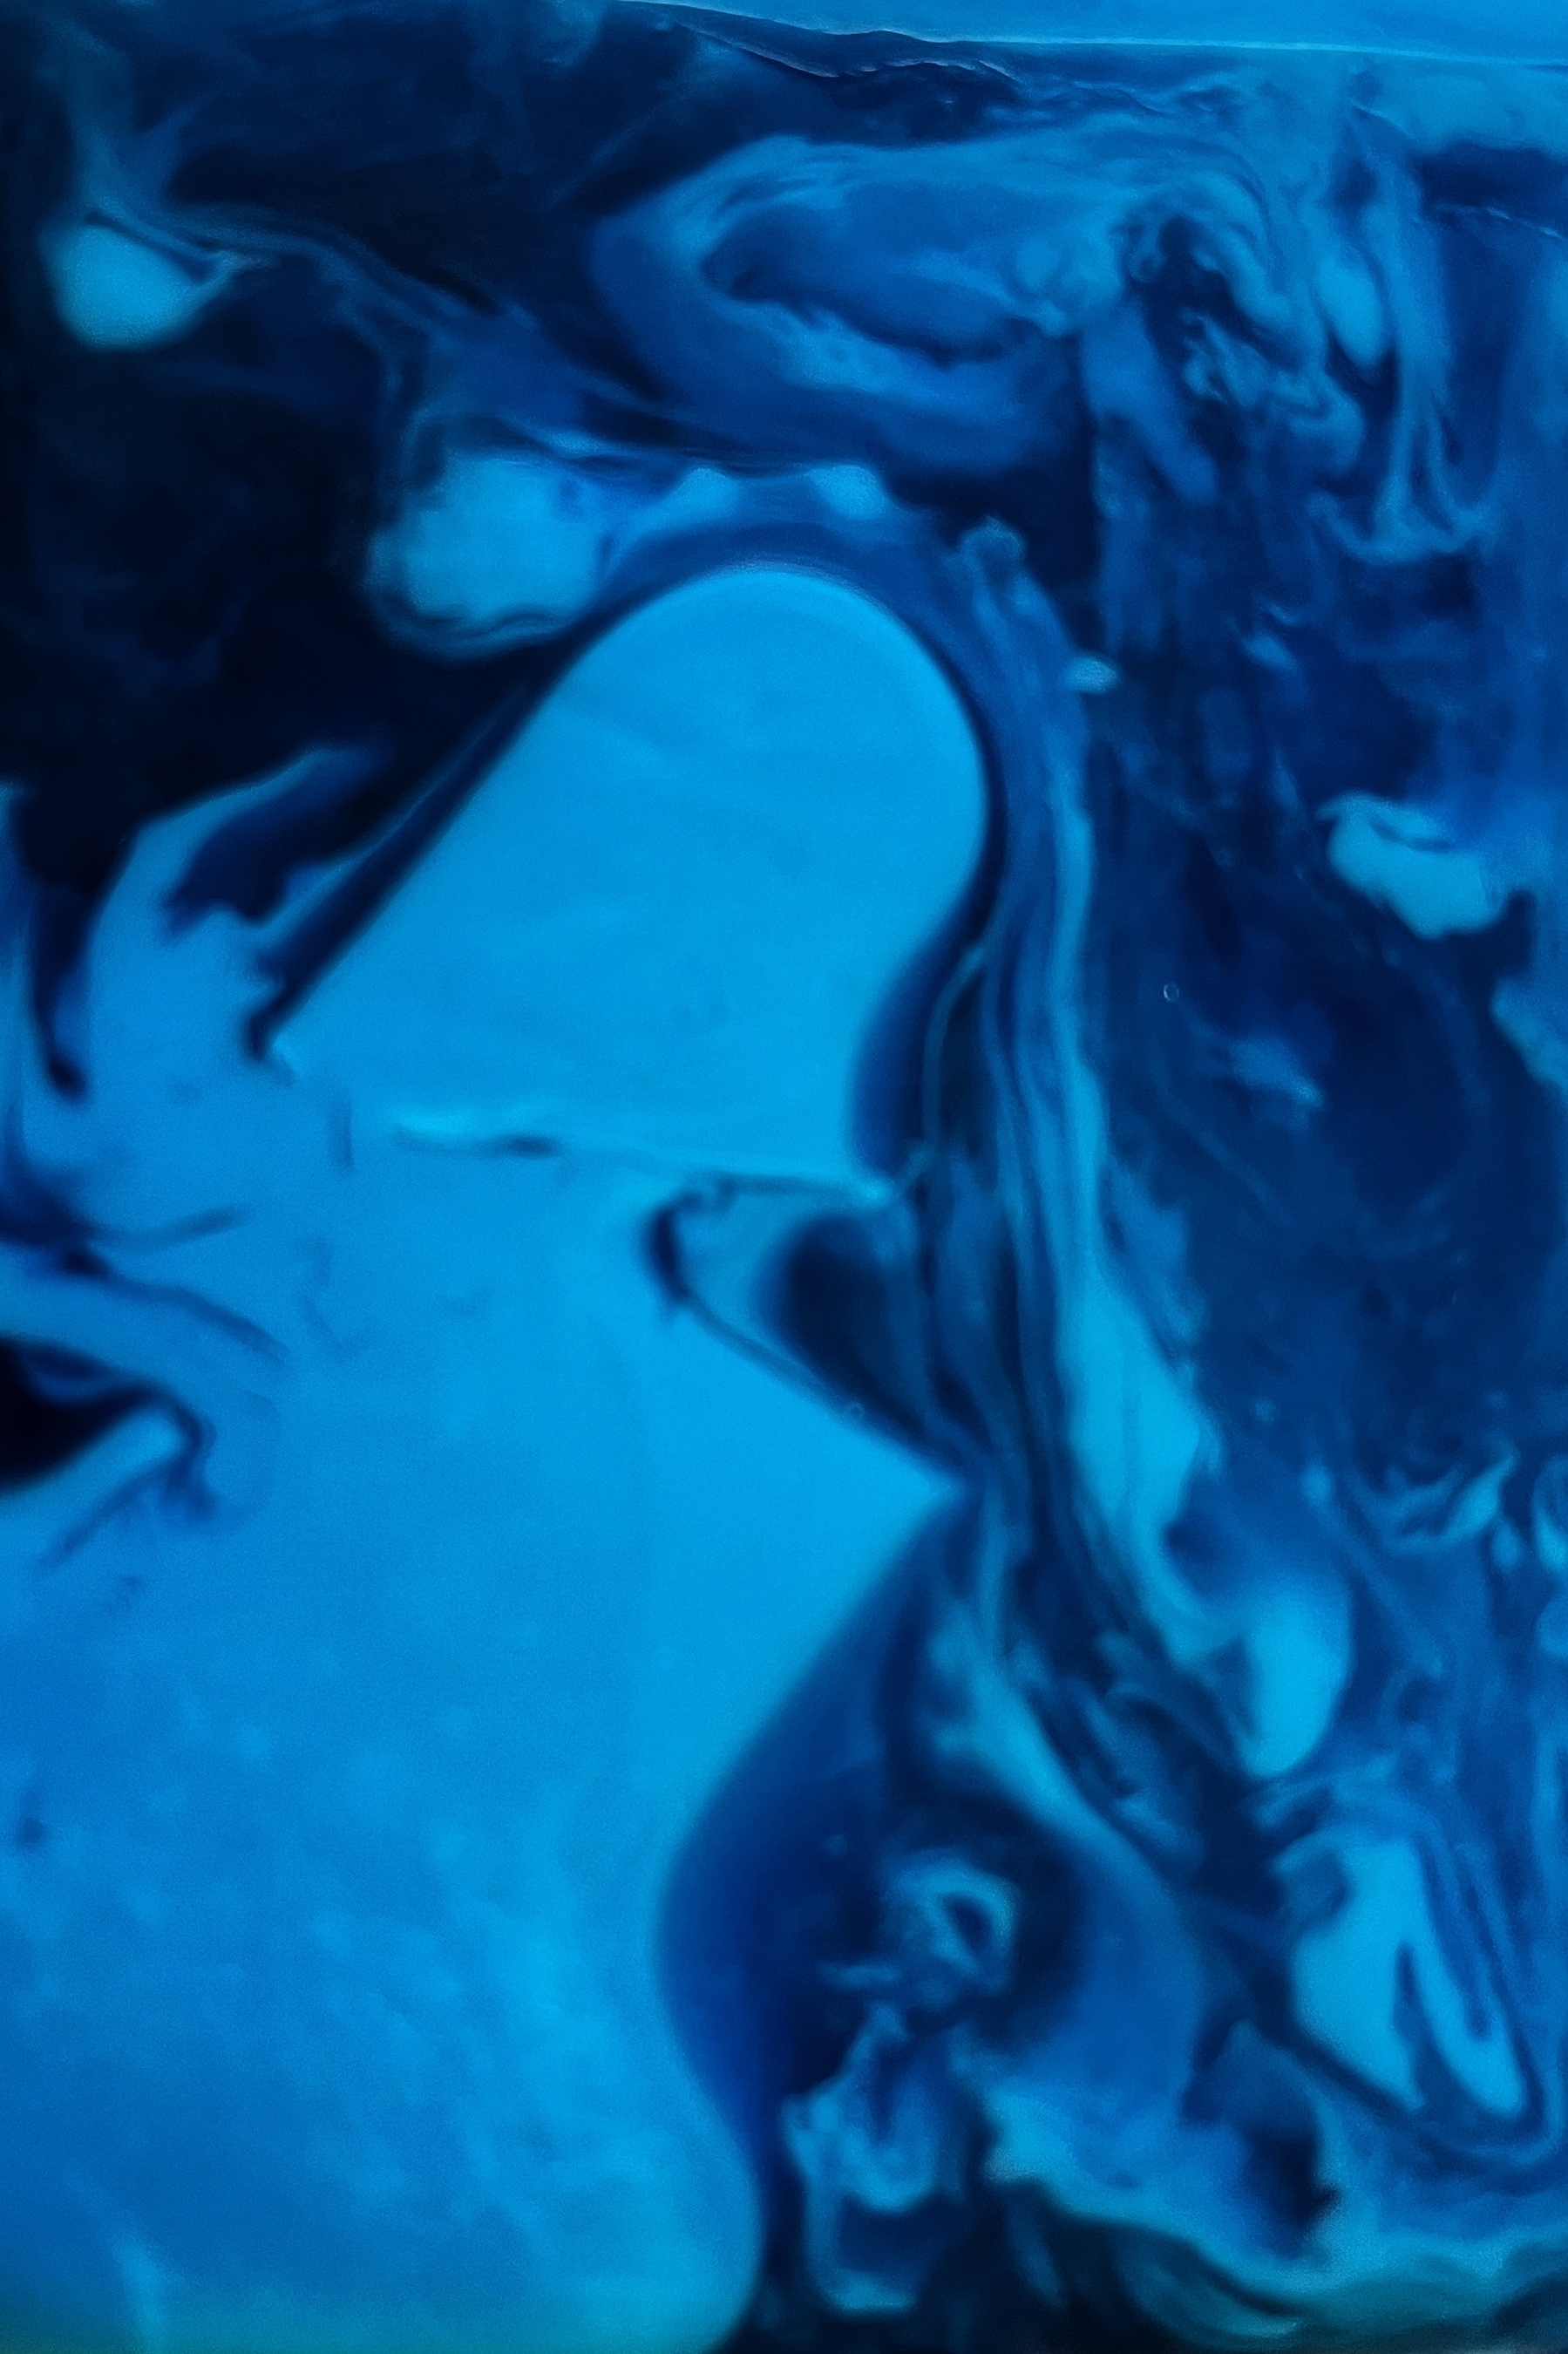 Blue curved and cloudy pattern. Its a zoomed in picture of… a soap